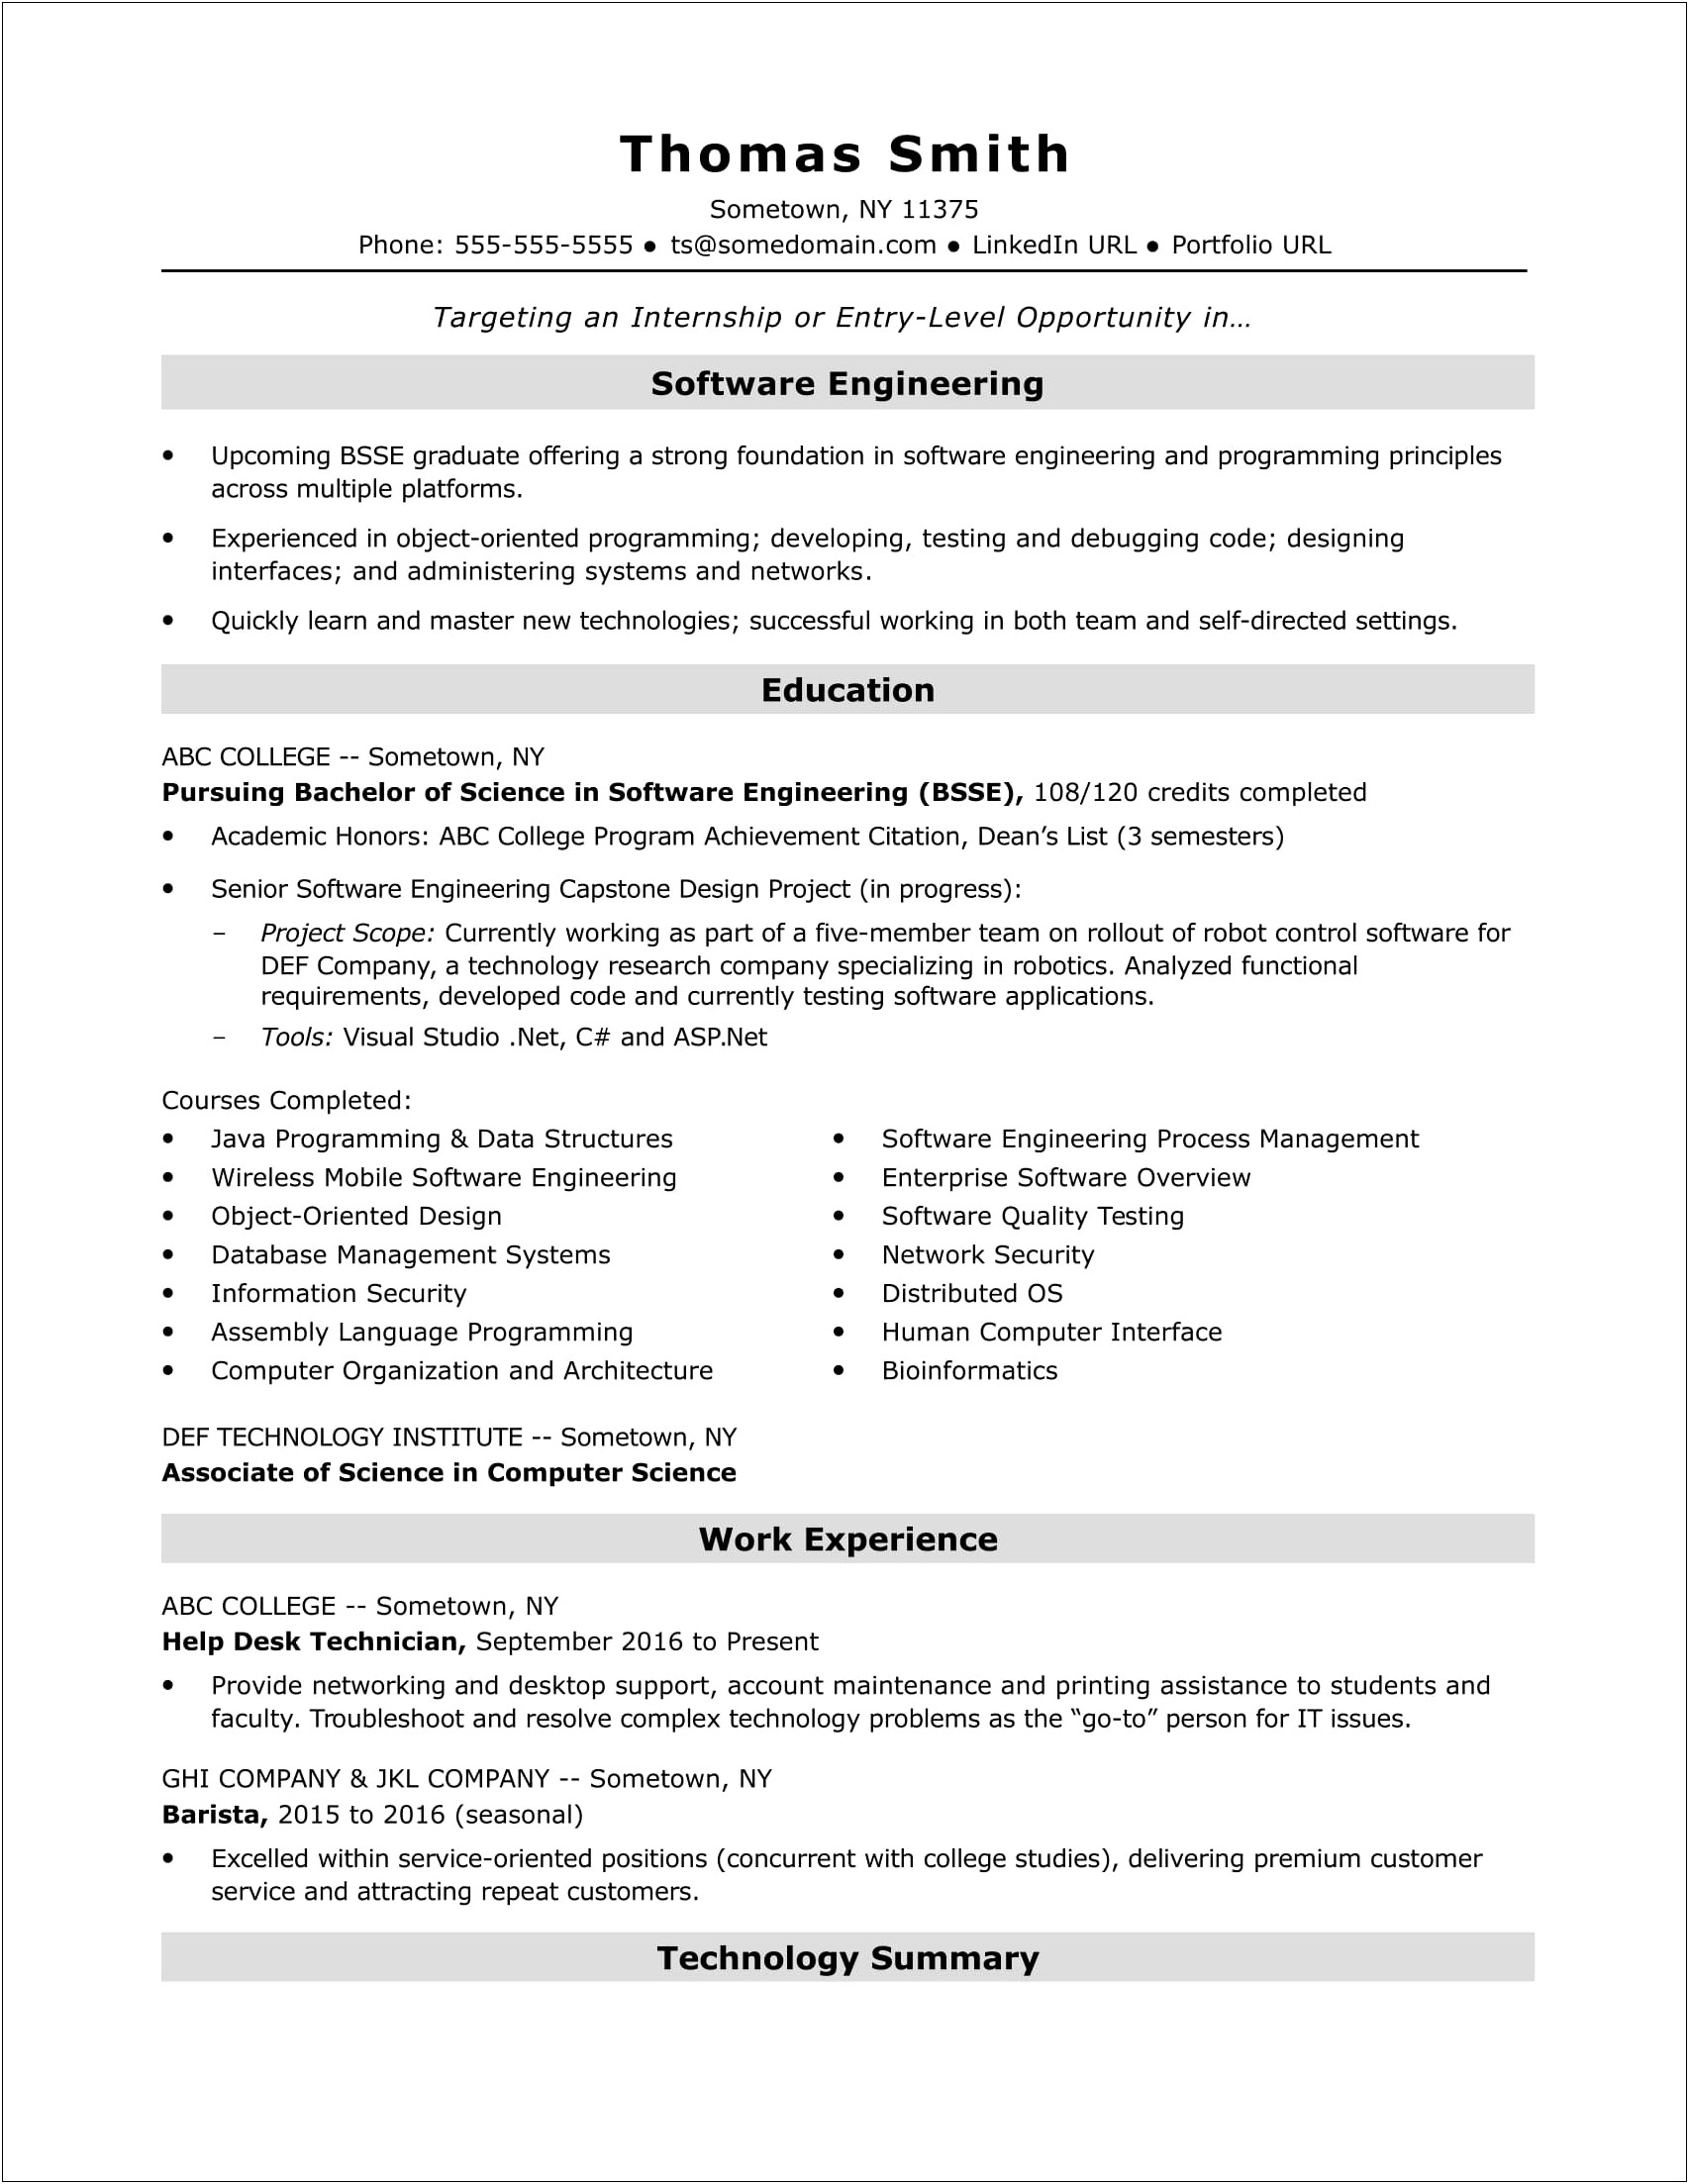 Intension To Enroll In A Program Resume Example